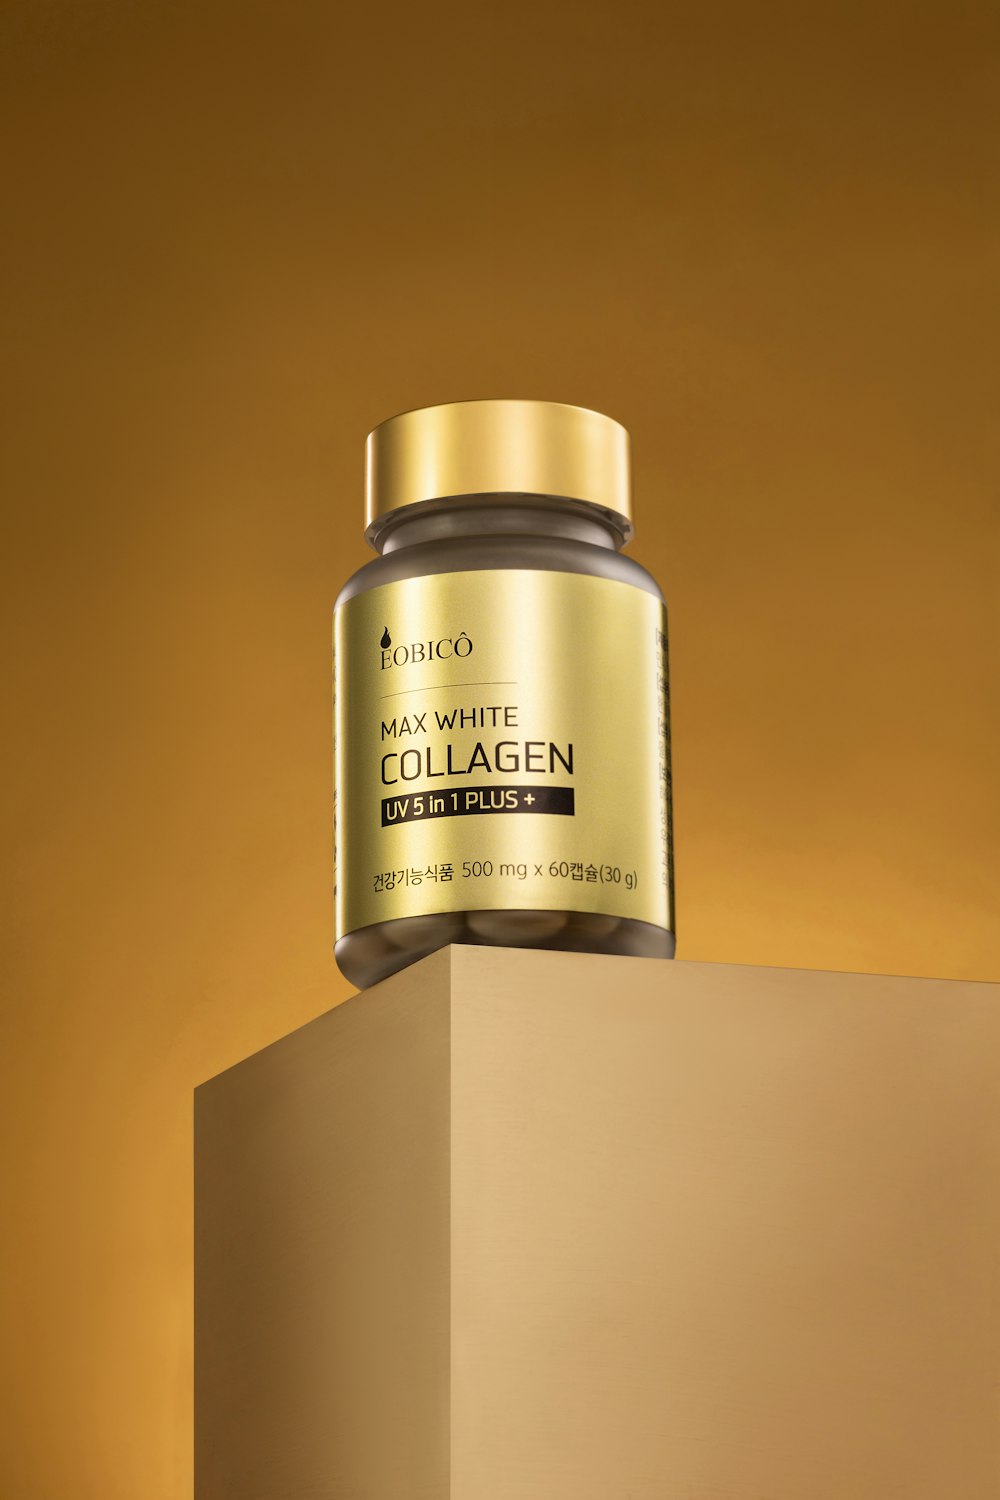 a jar of collagen on top of a box